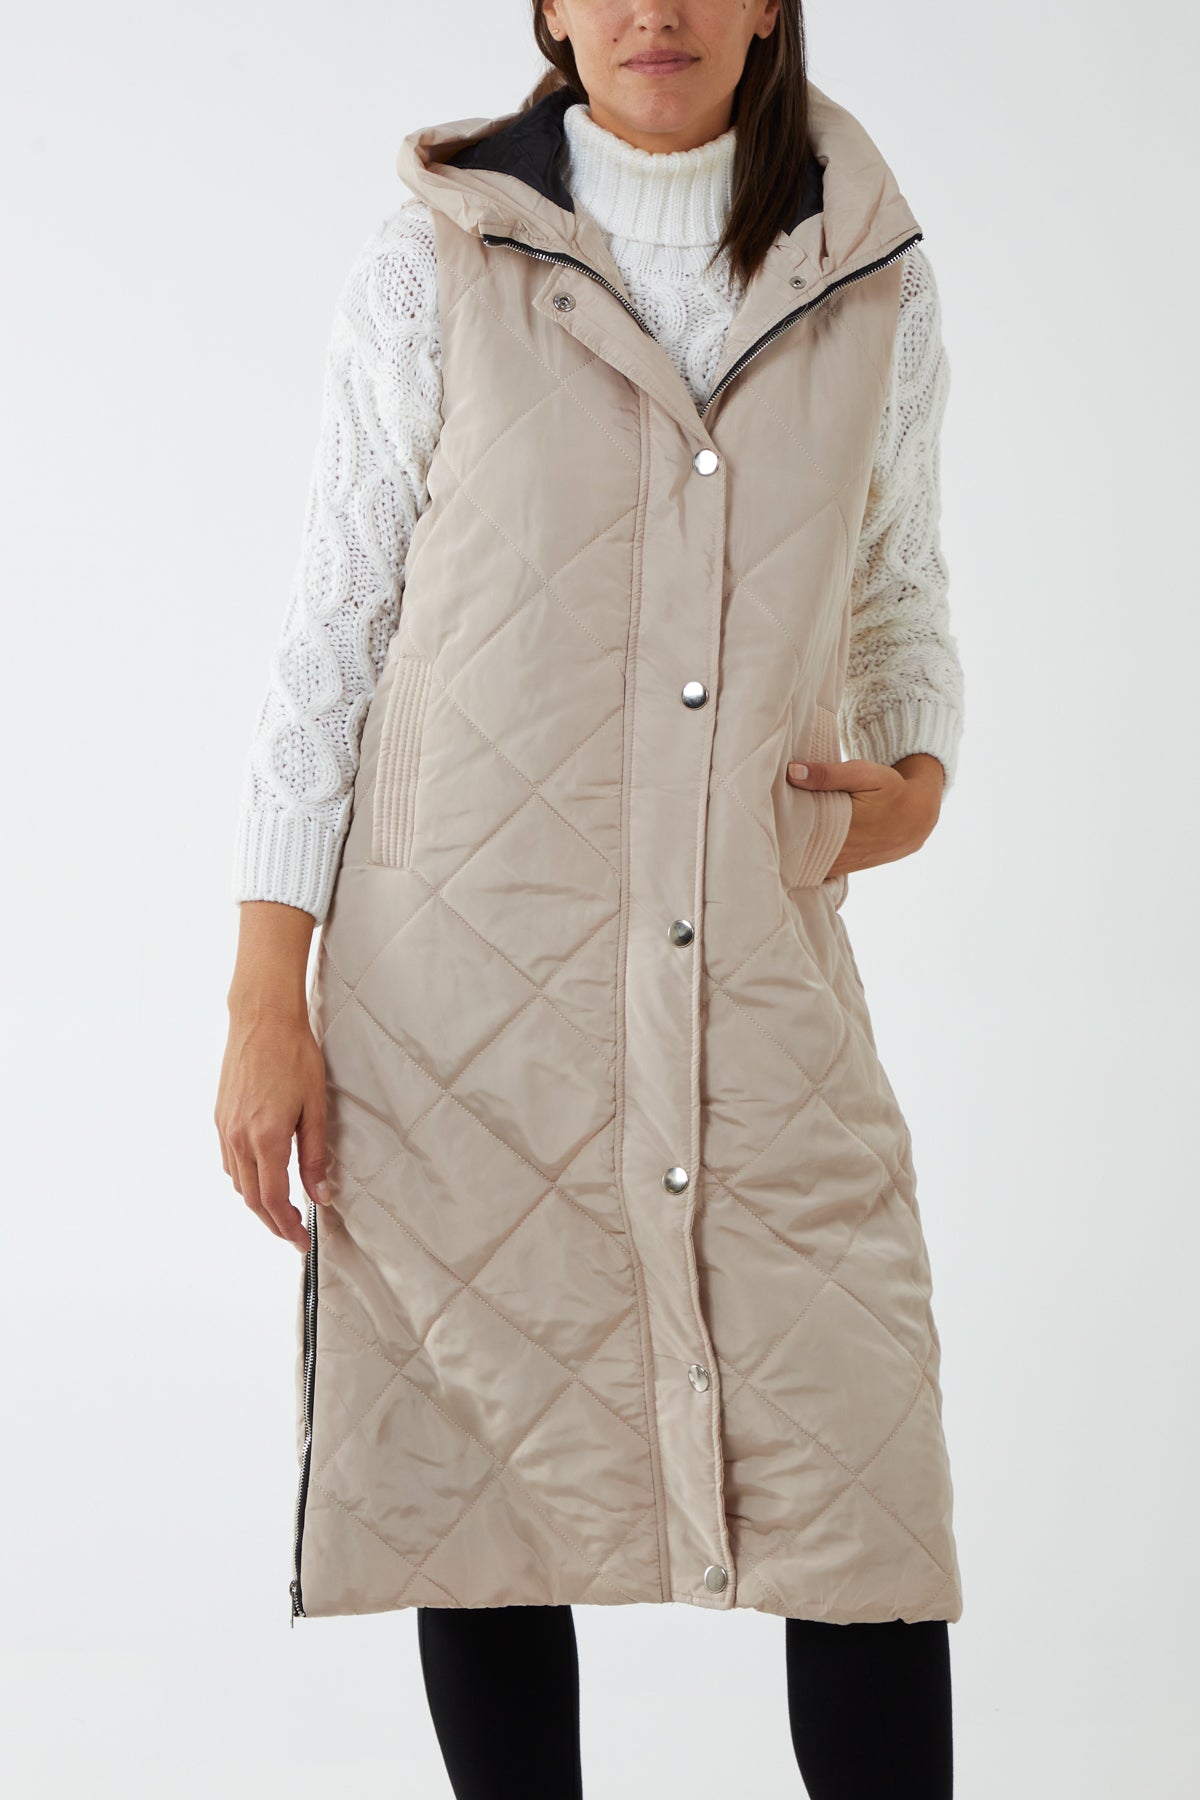 Diamond Quilted Zipped Hooded Gilet